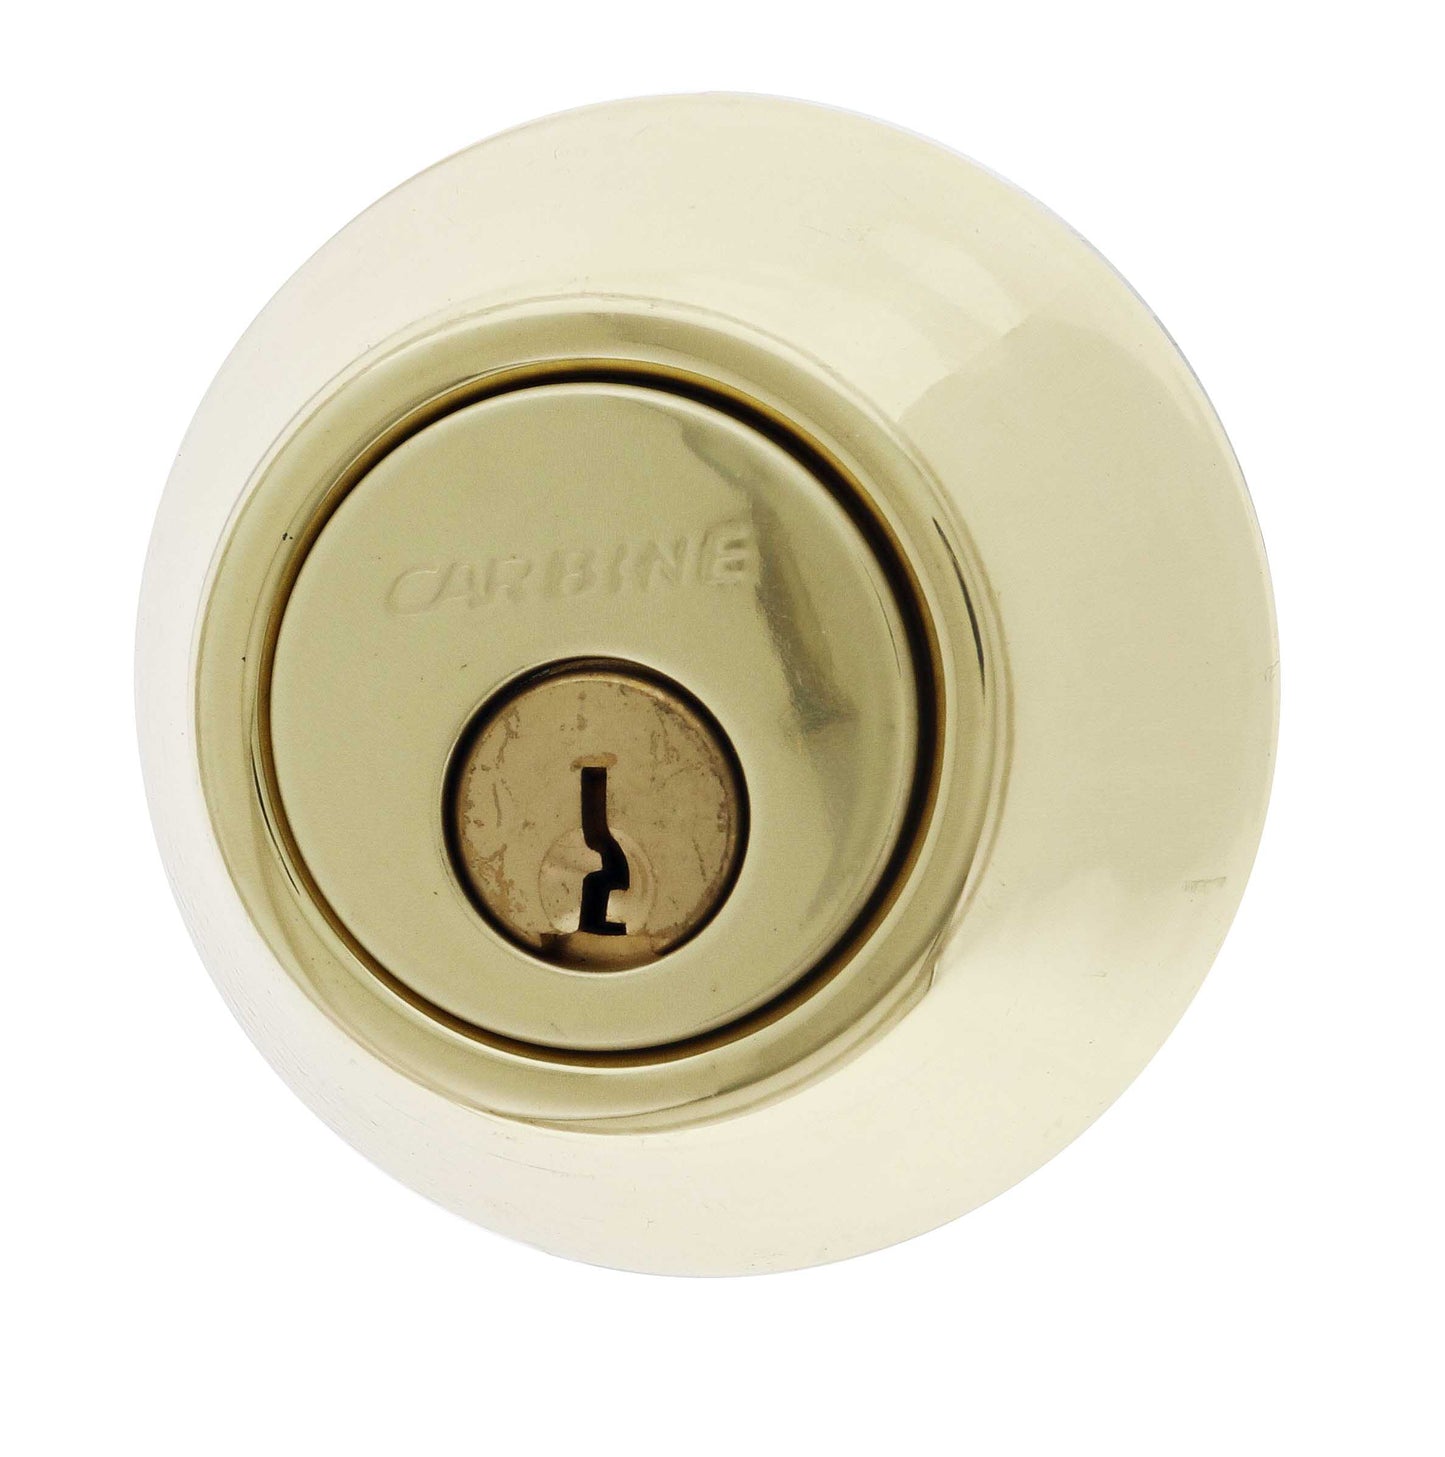 Carbine LB Residential Series Standard Double Cylinder Deadbolt, 60-70mm backset, C4 Keyed to Differ , Boxed, Polished Brass